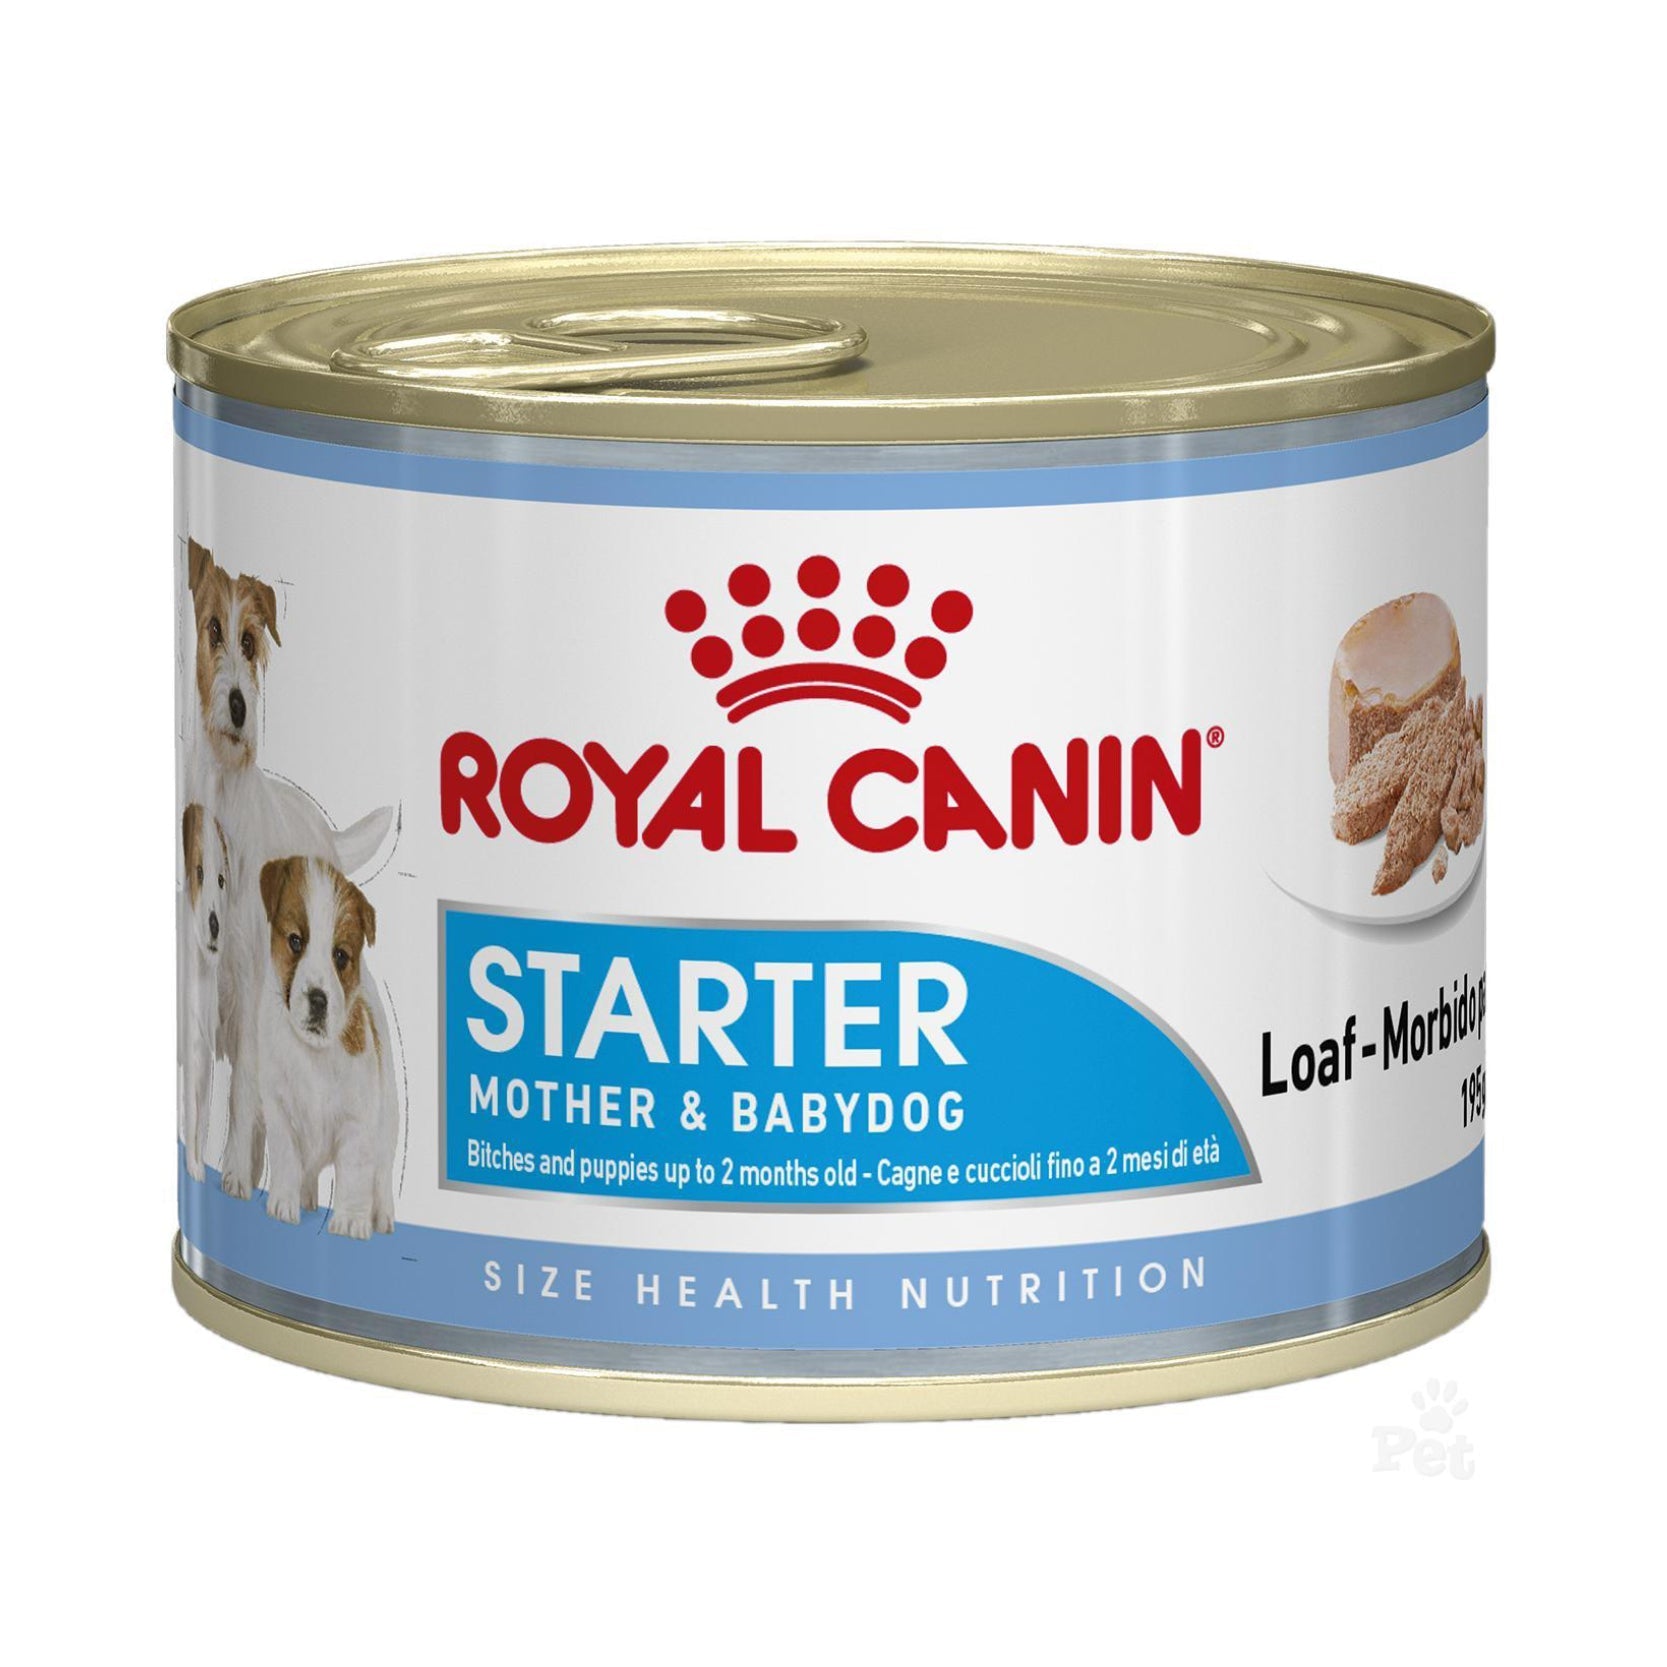 Royal Canin Starter Mousse Mother & Baby Dog